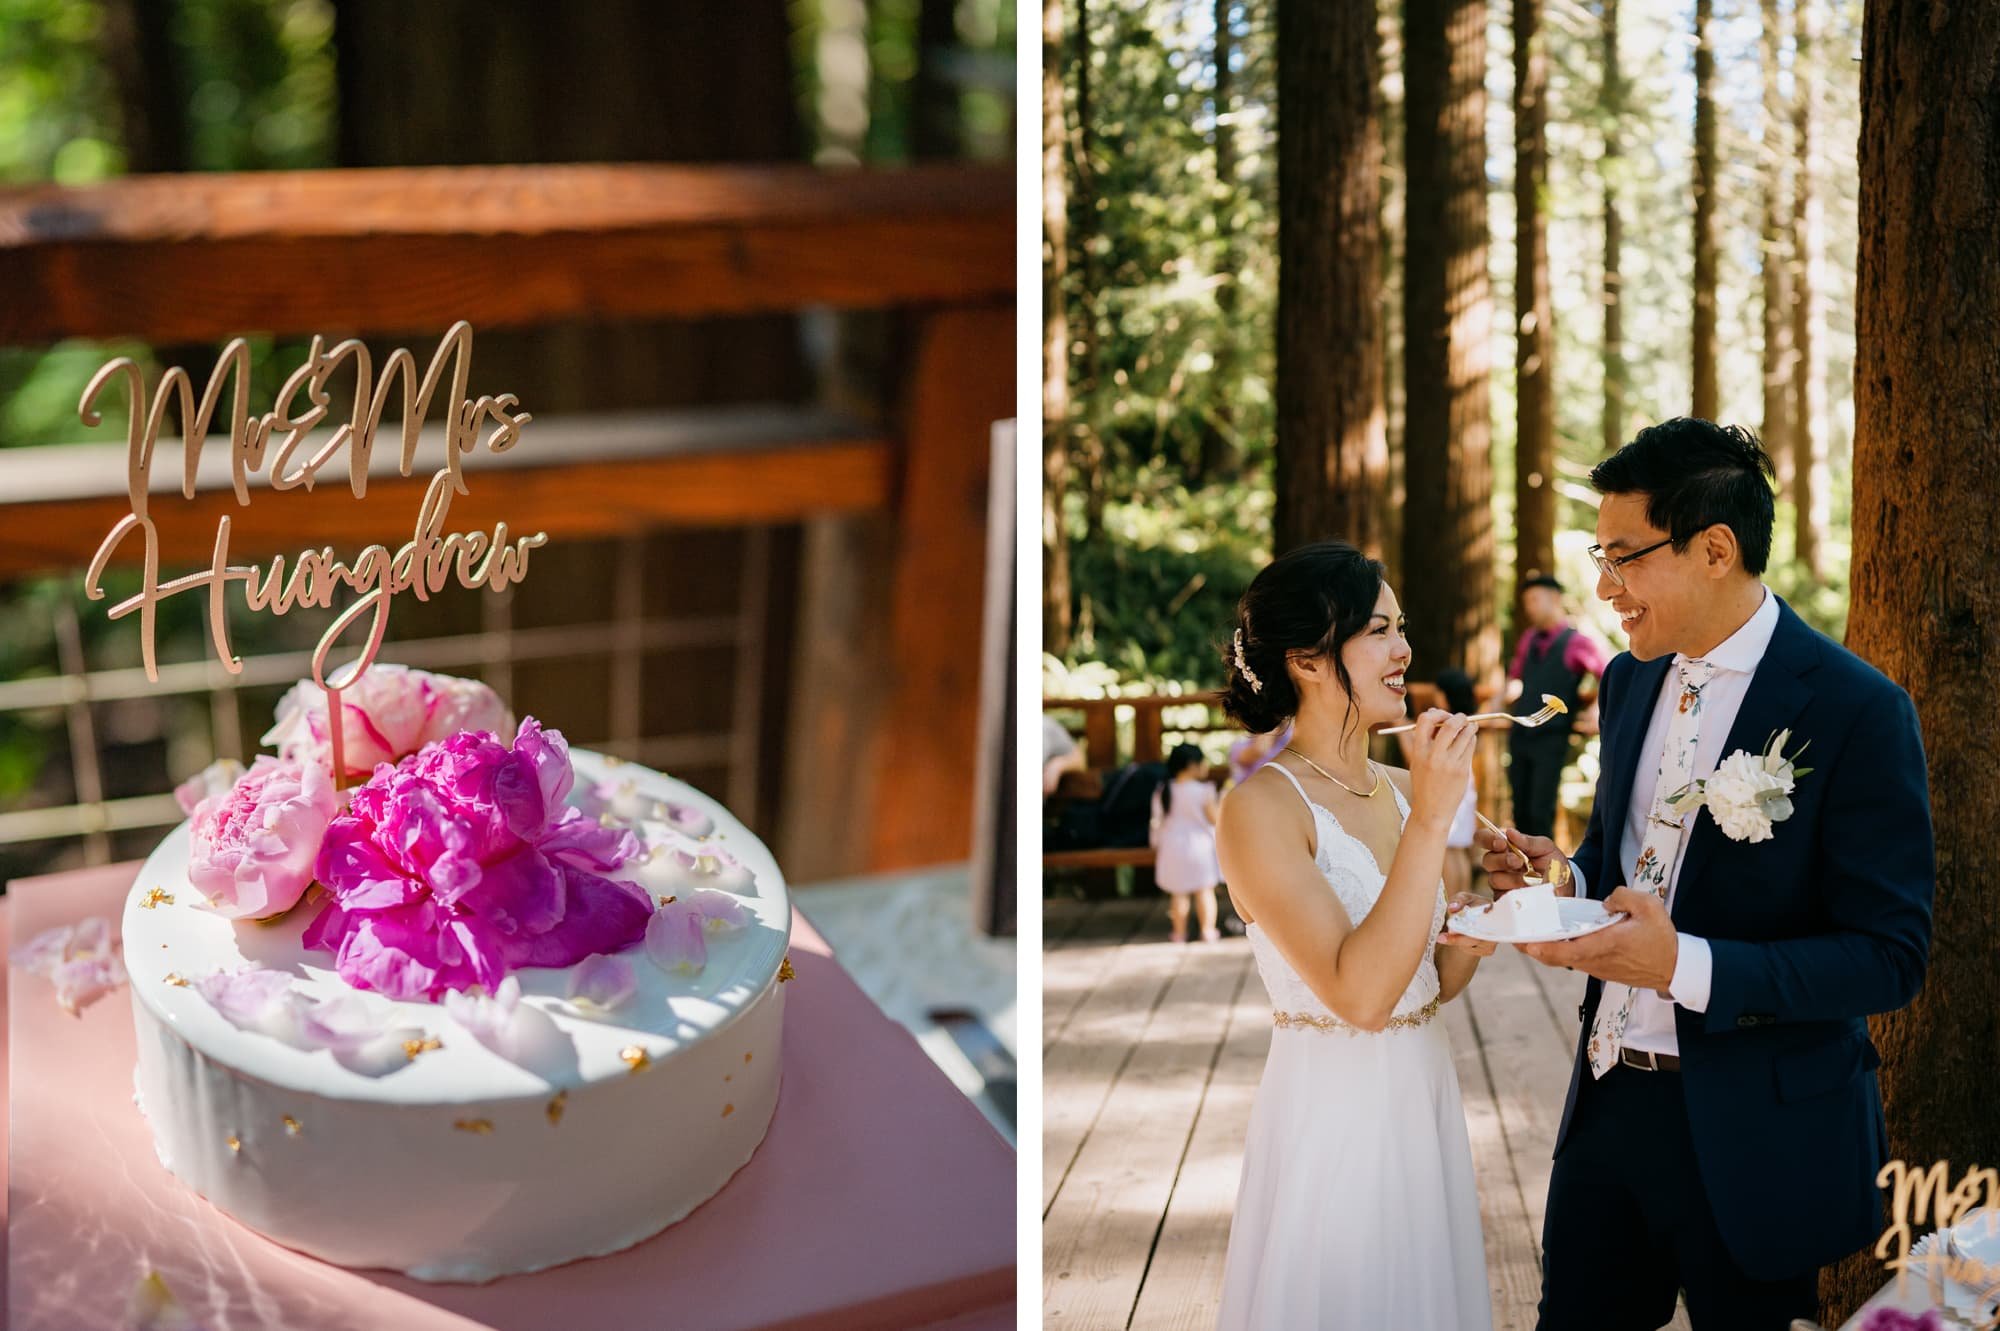 Side by side photos of cake and bride and groom eating cake